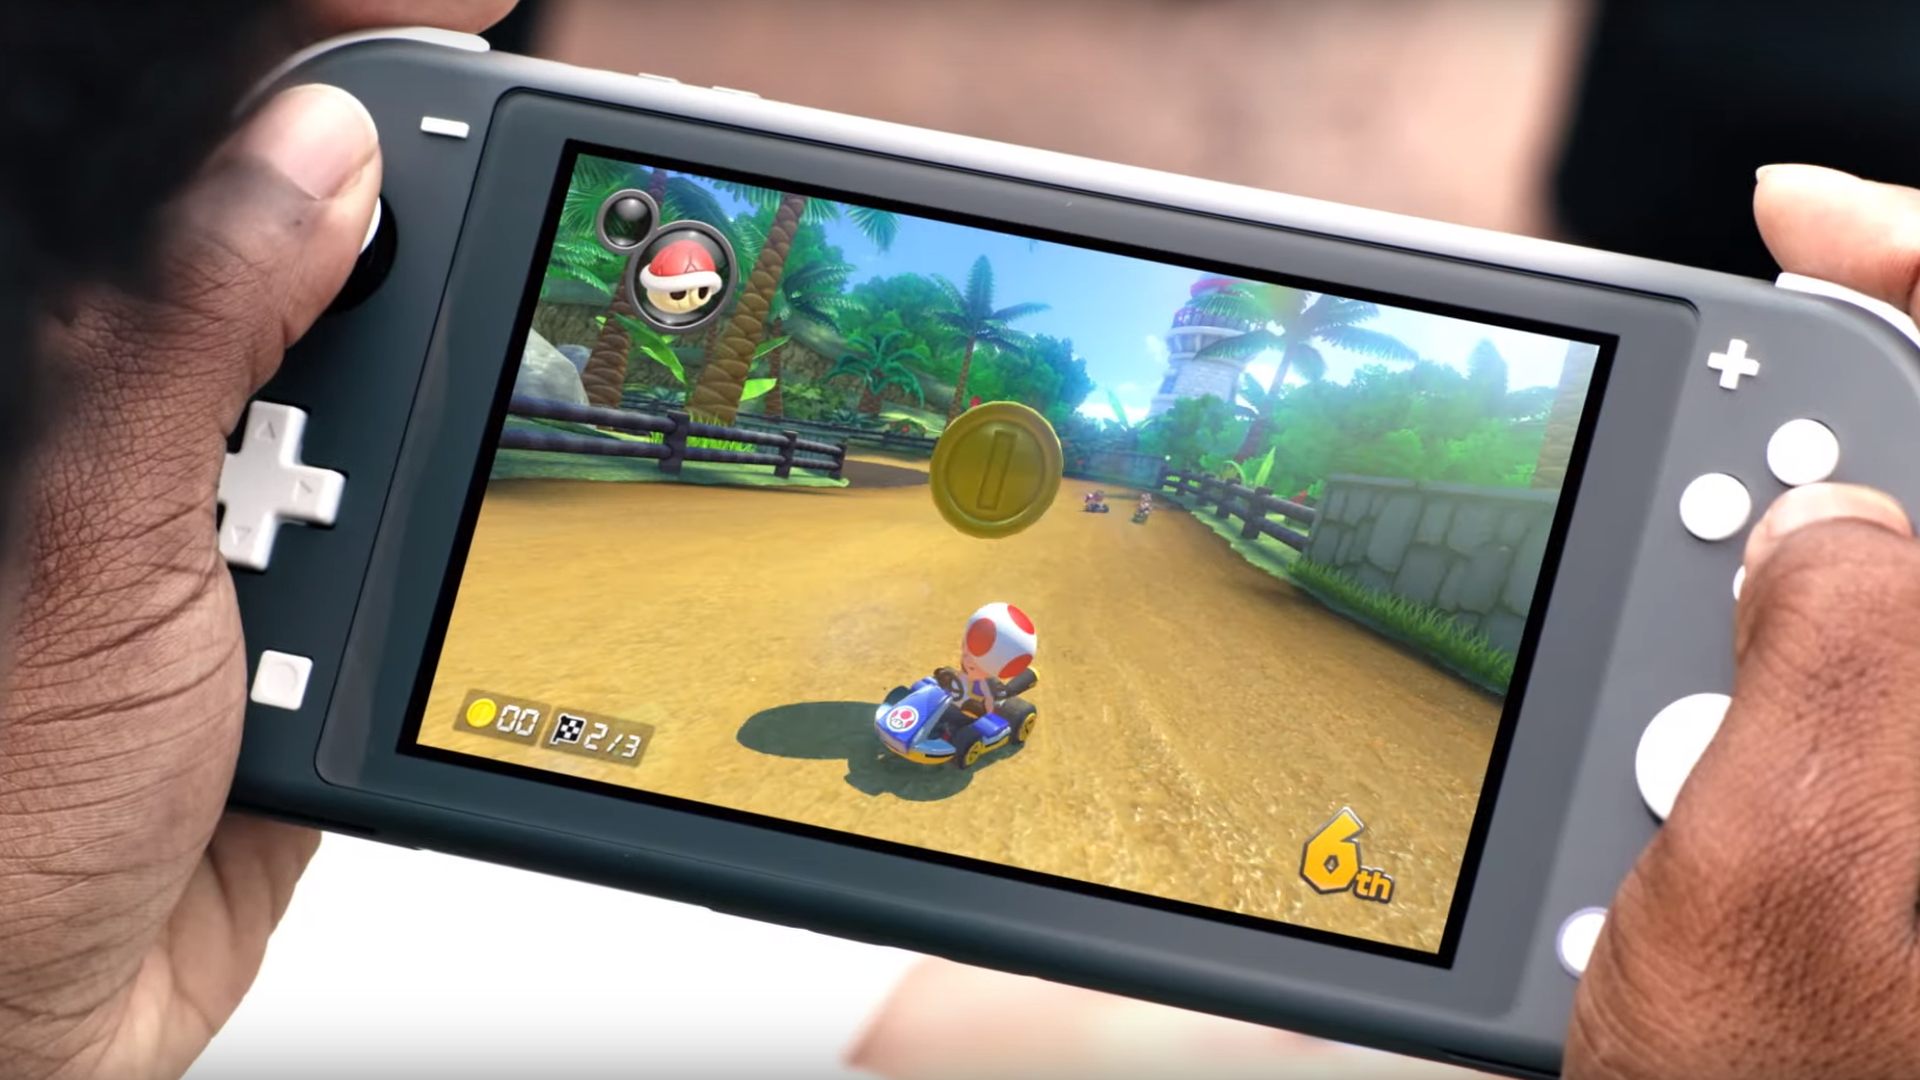 Potential Switch Port Round-Up - The Wii U Games That Haven't Come To Switch